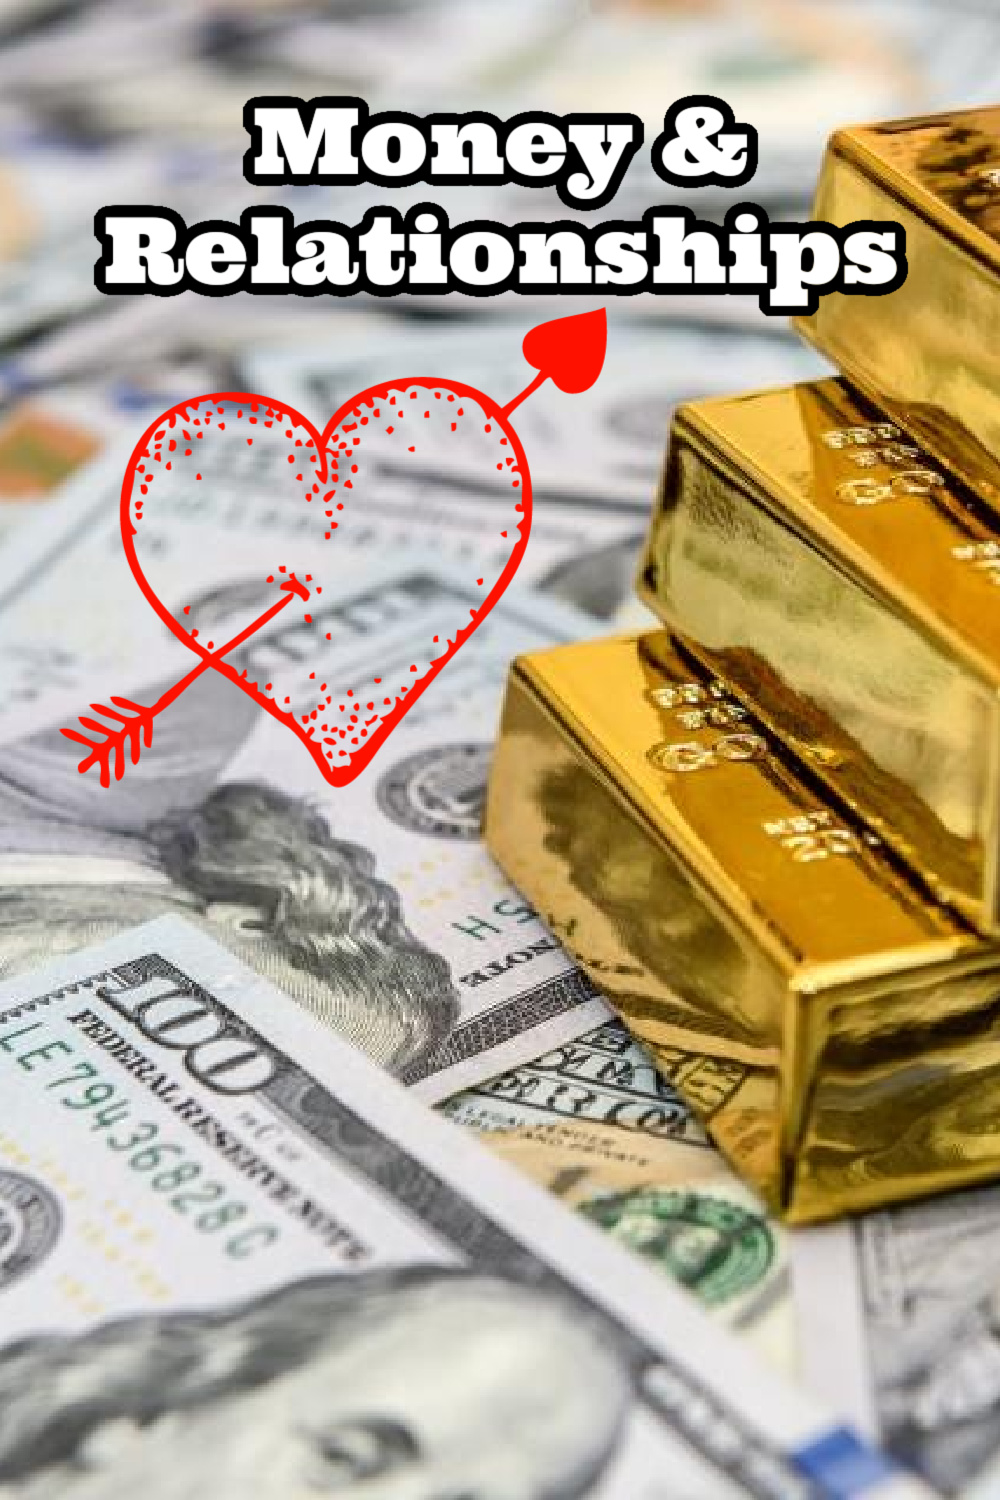 Money Issues in Relationships | 50/50 Relationships vs Traditional Relationships